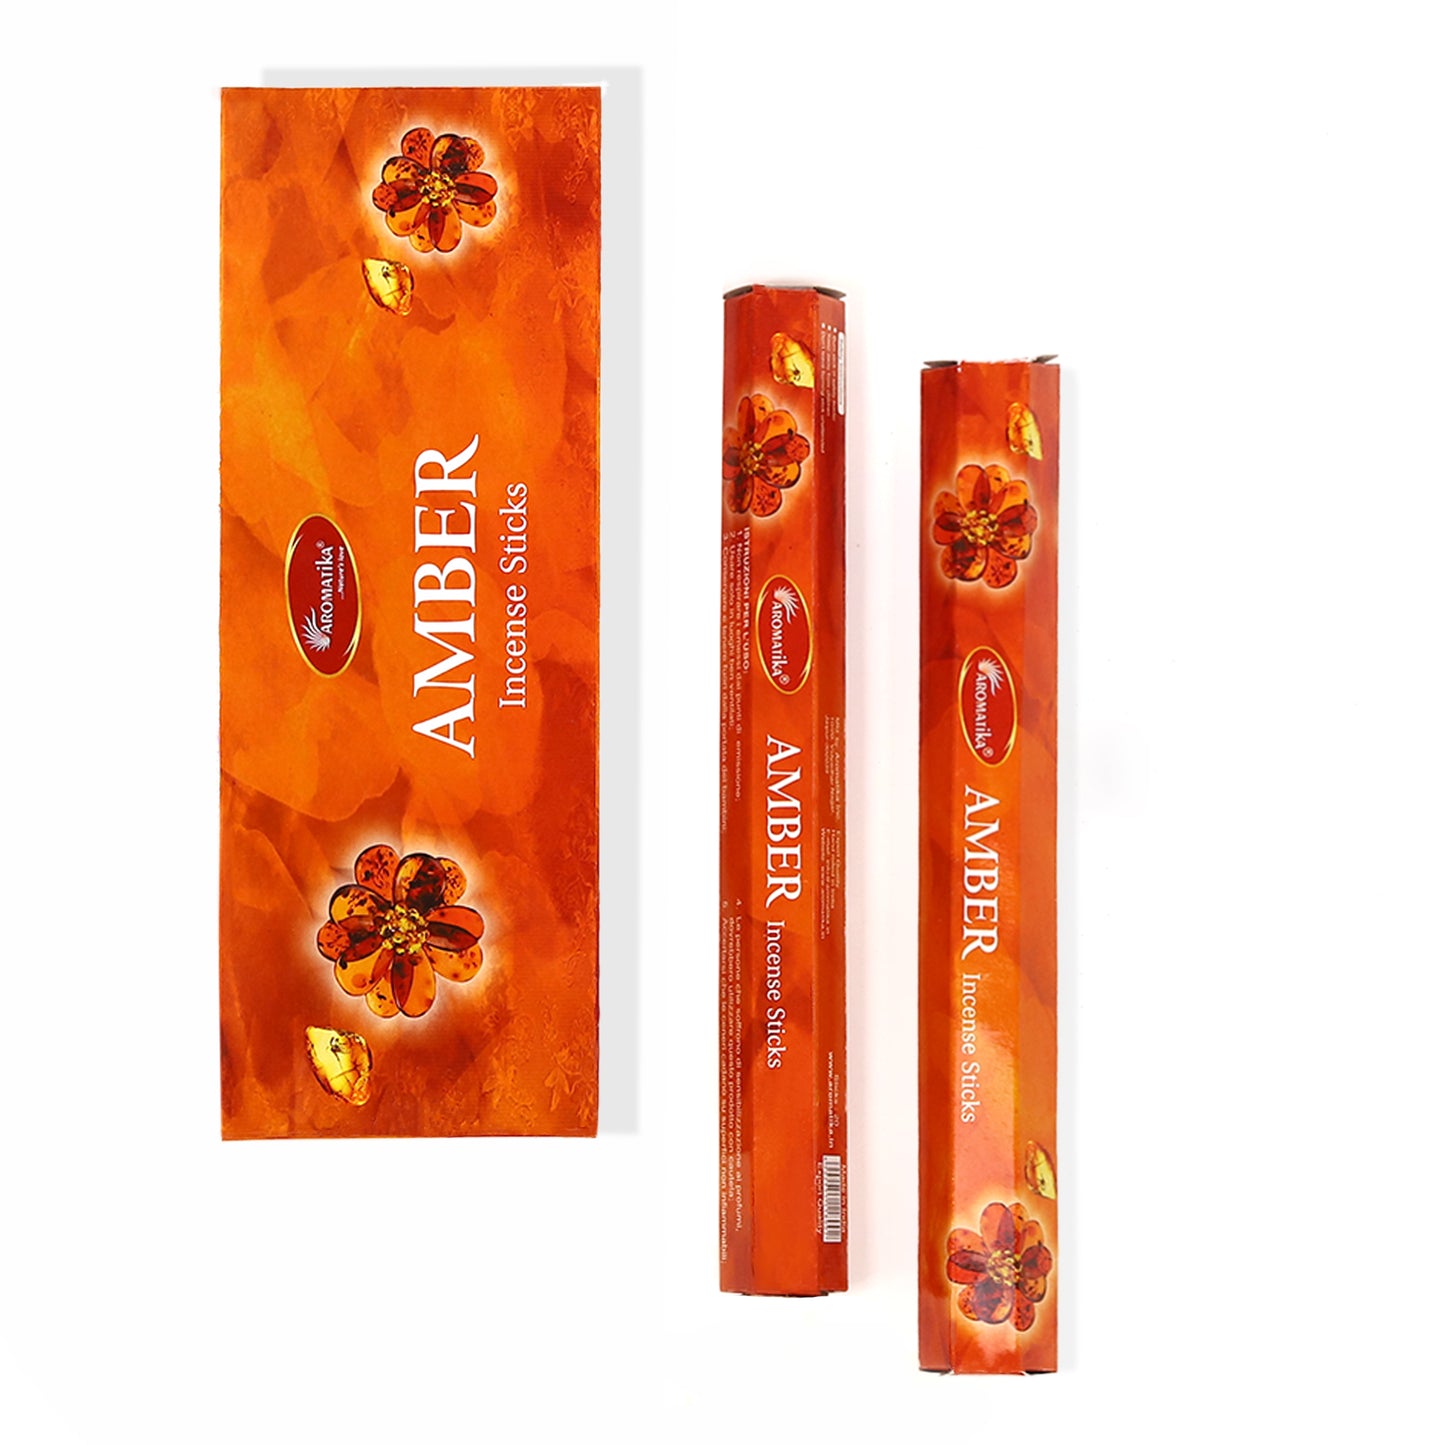 Calming Atmosphere with Amber Incense Sticks